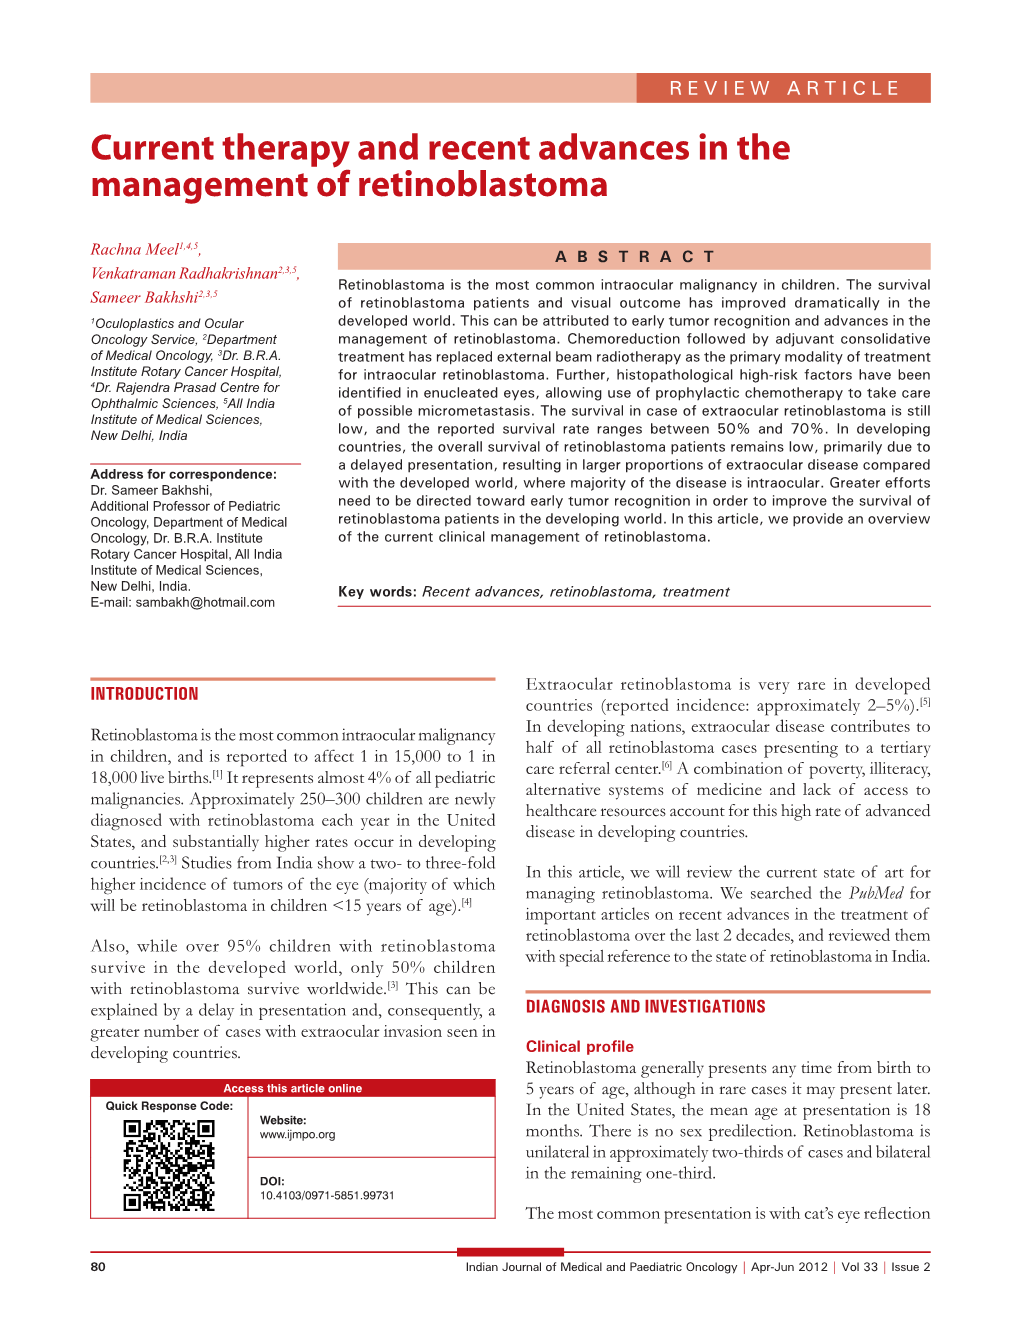 Current Therapy and Recent Advances in the Management of Retinoblastoma